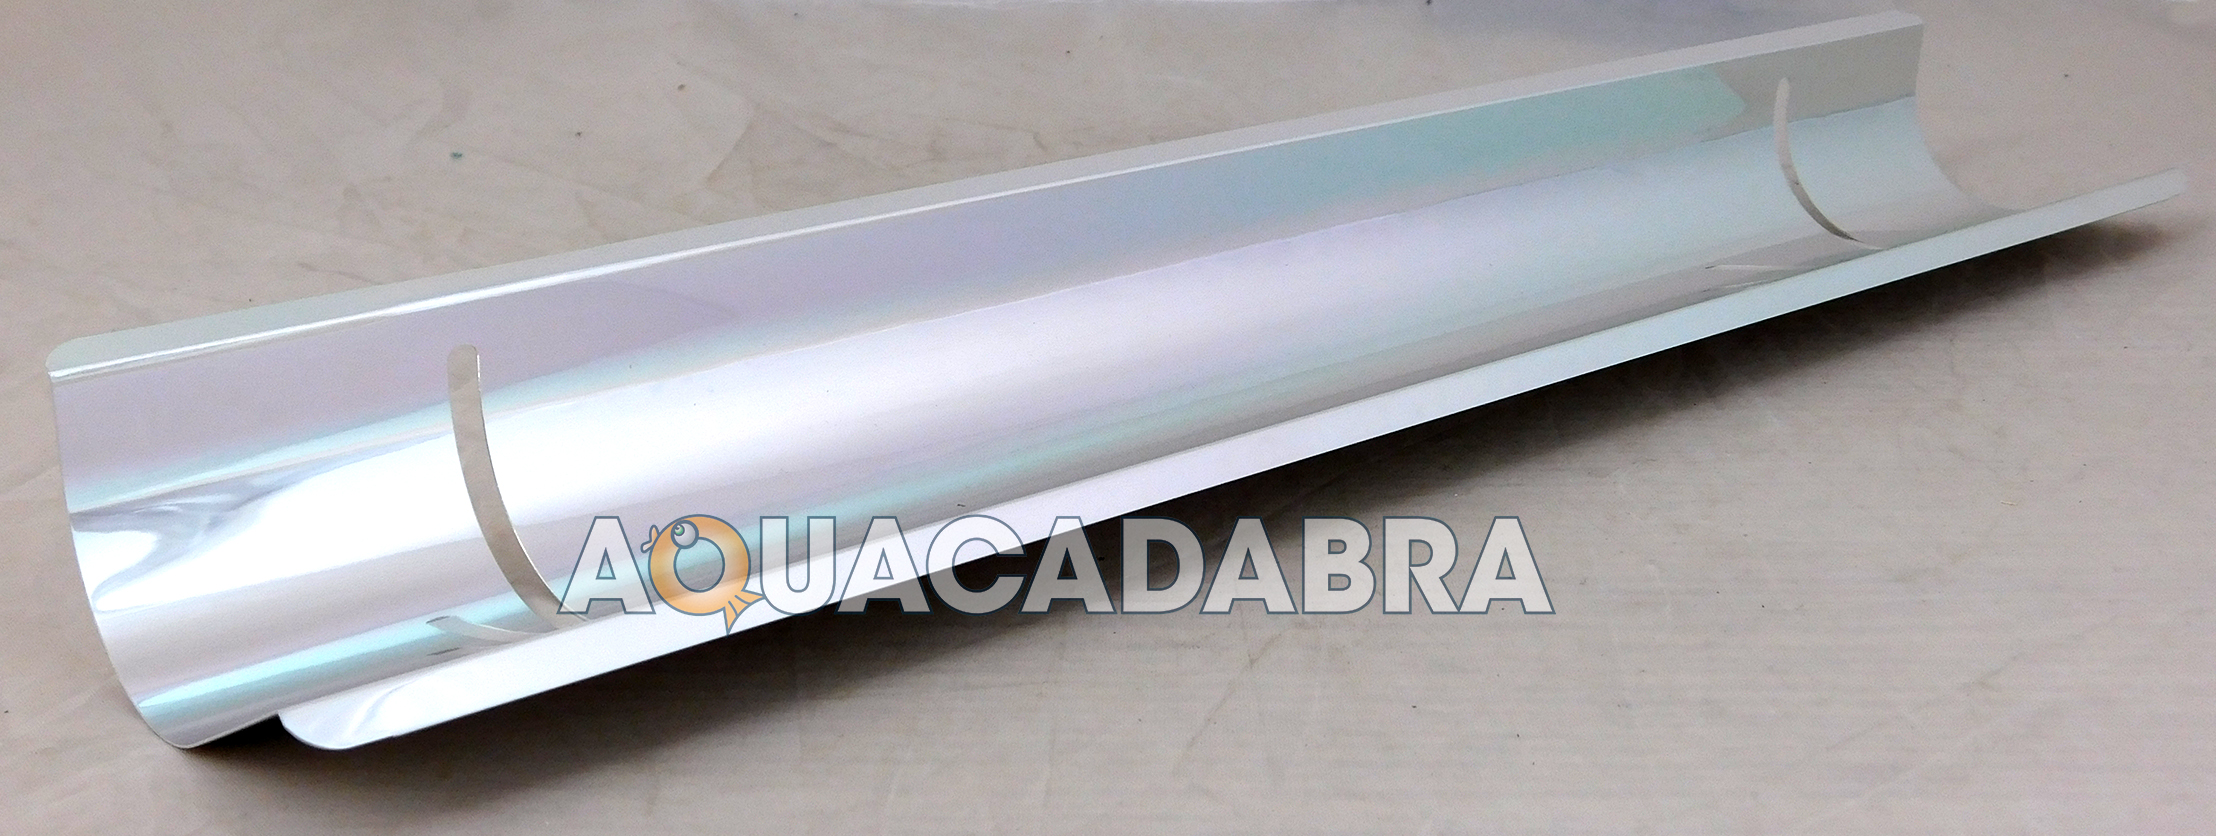 Arcadia Reflector for T8 Fluorescent Tubes 18 W 600 mm